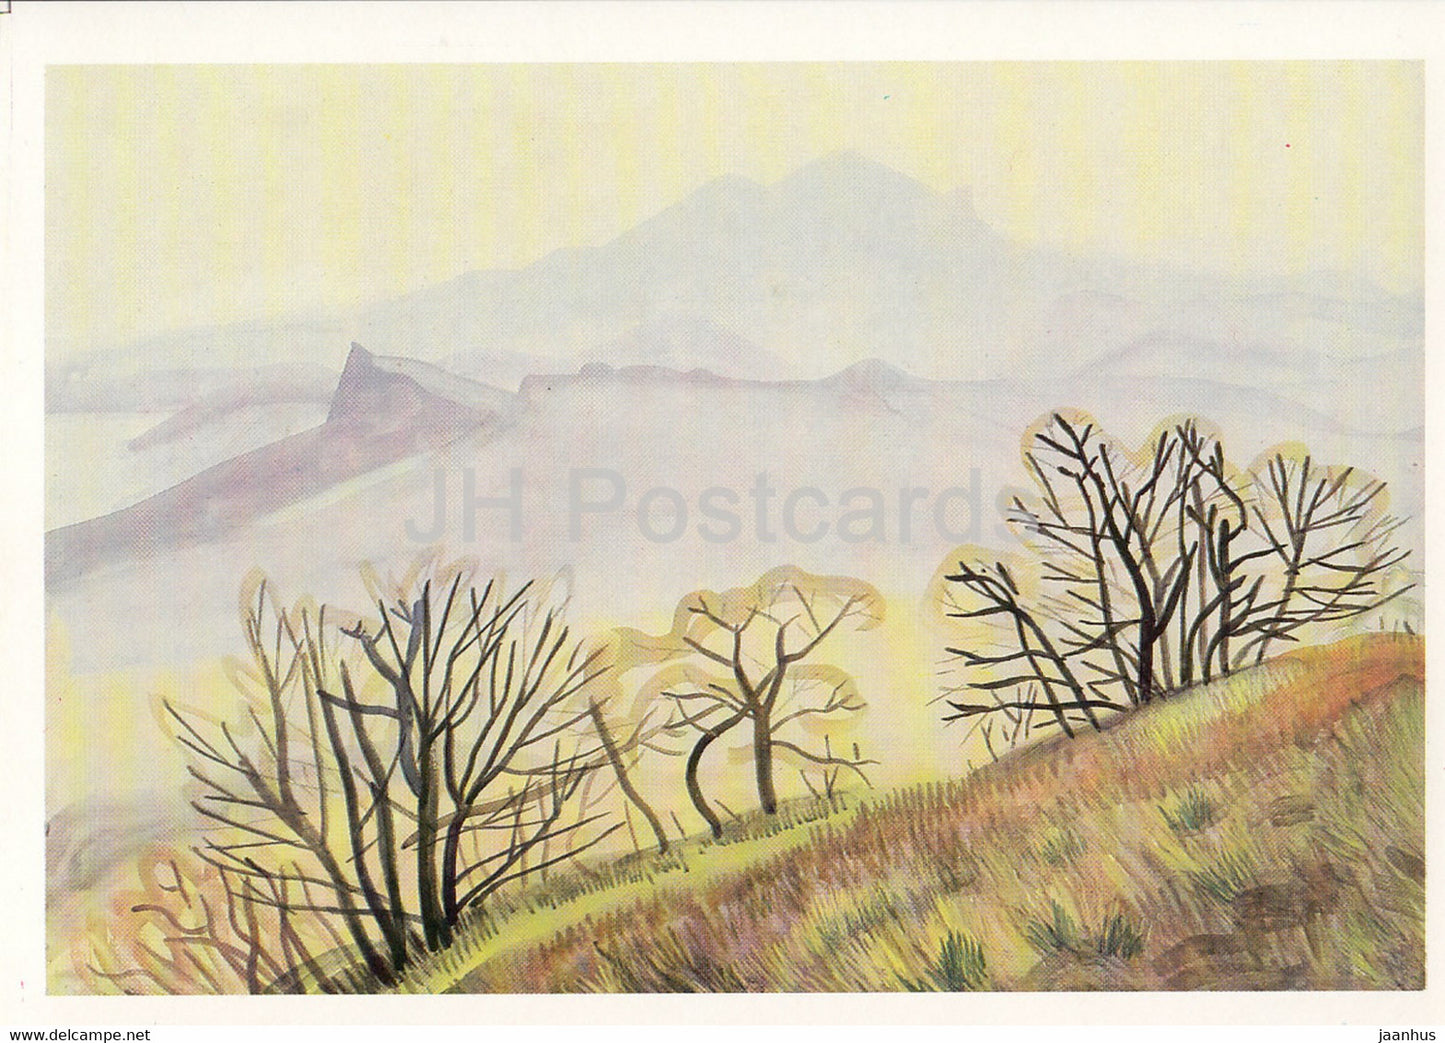 painting by G. Efimochkin - Koktebel - The Spring - Russian art - 1989 - Russia USSR - unused - JH Postcards